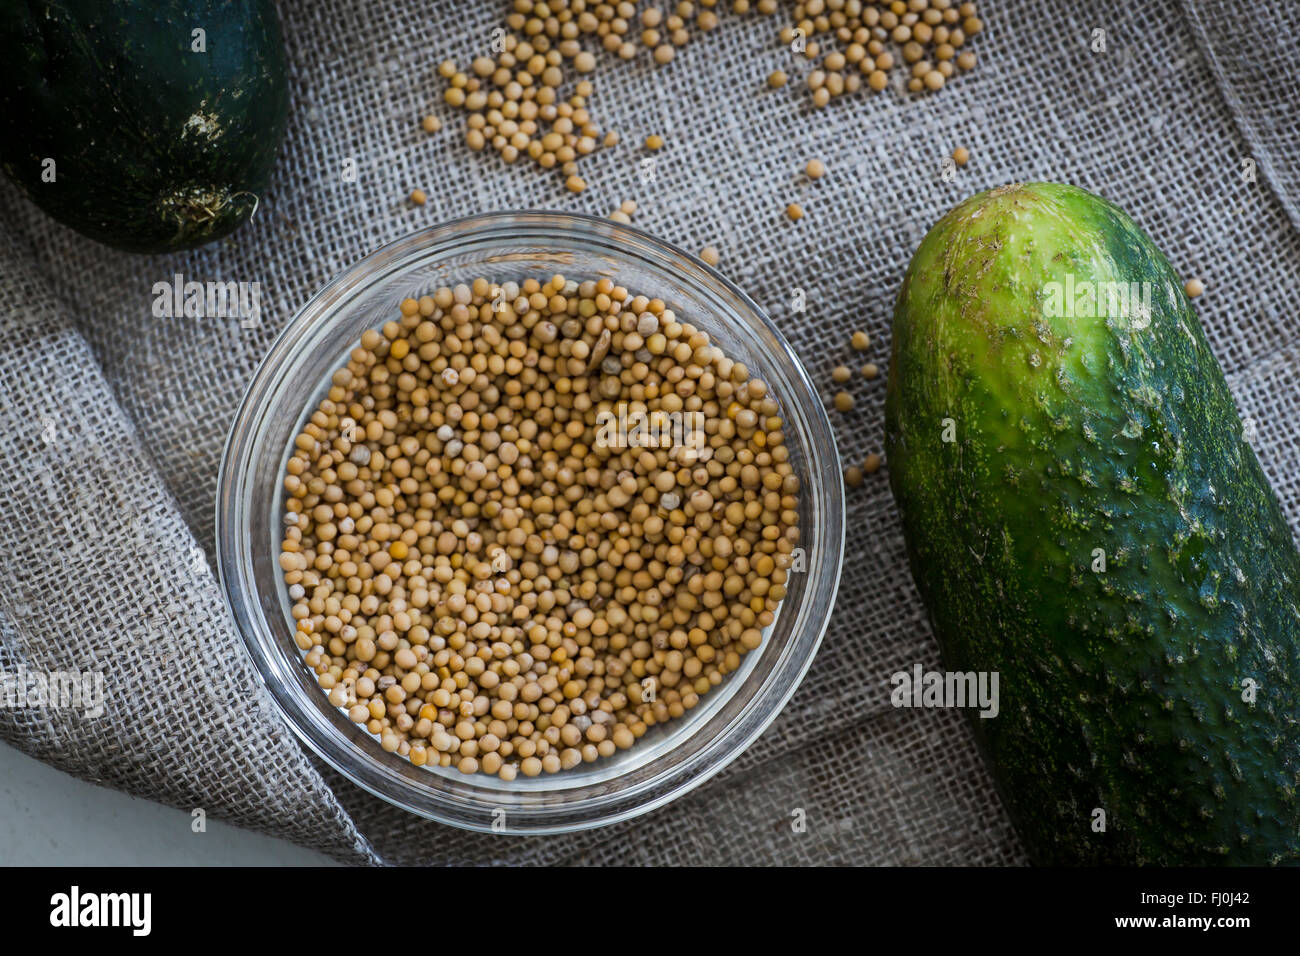 Mustard seeds and a cucumber. Ingredients for pickles Stock Photo